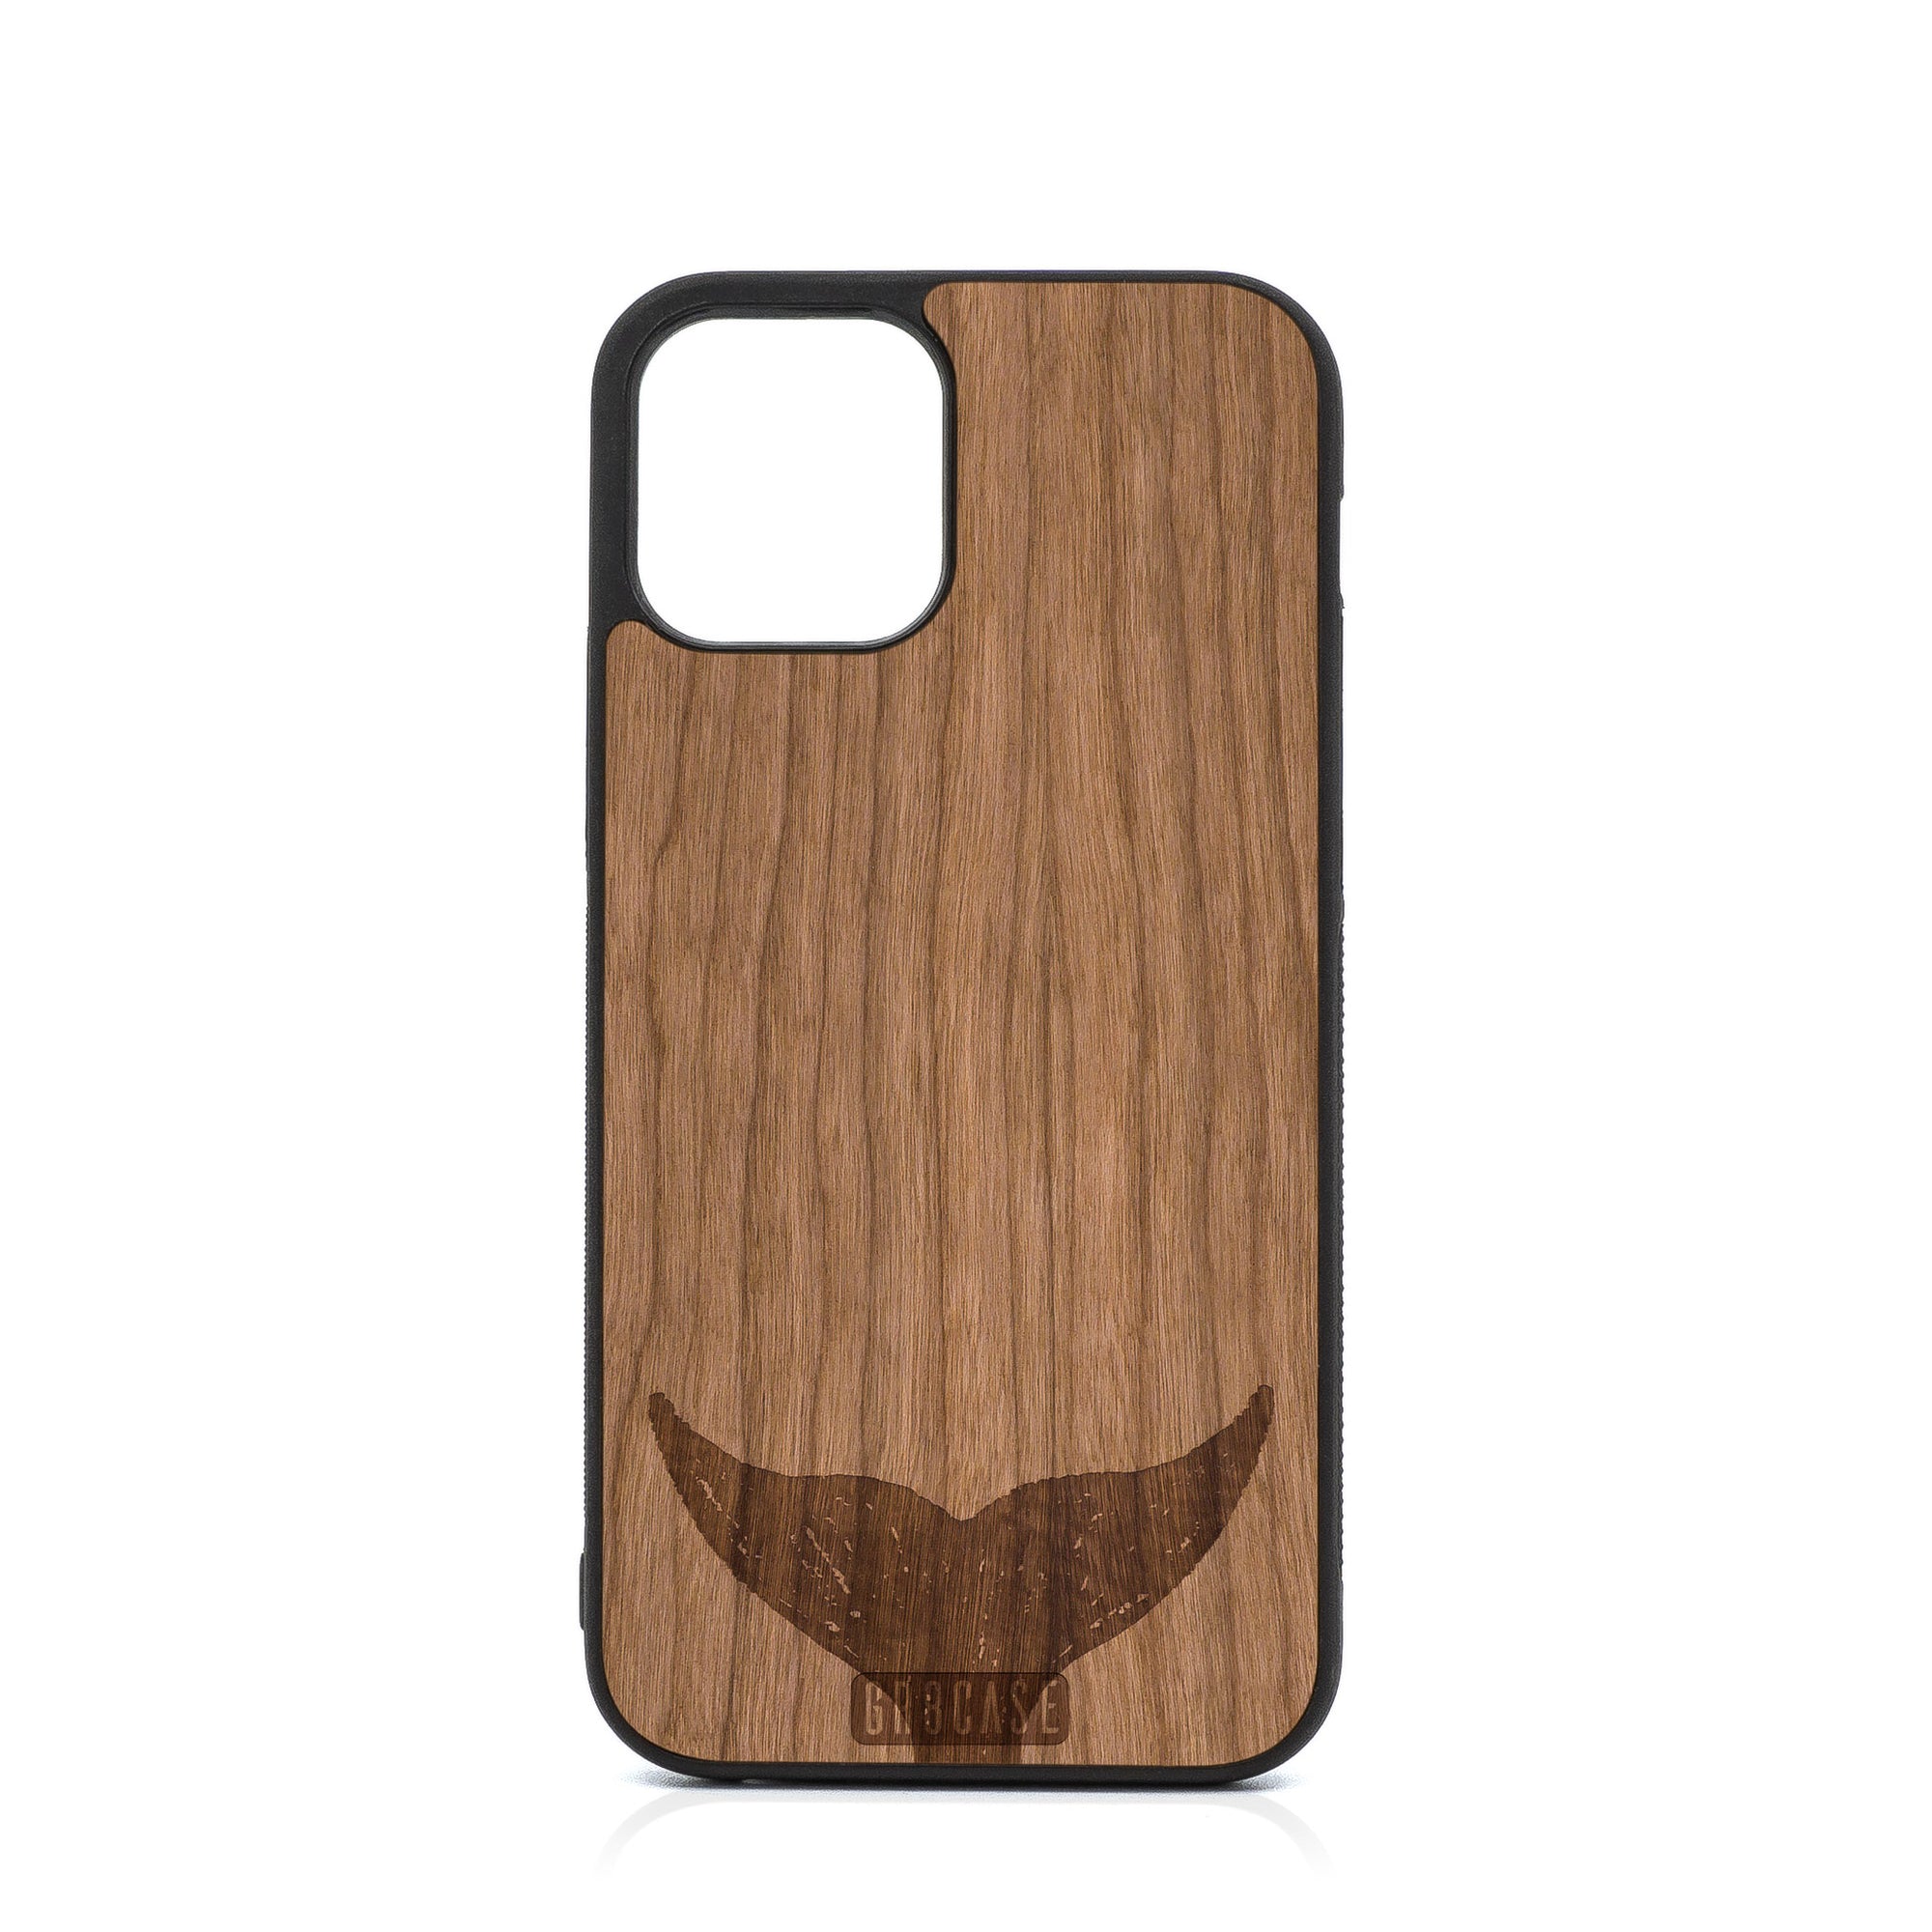 Whale Tail Design Wood Case For iPhone 12 Pro